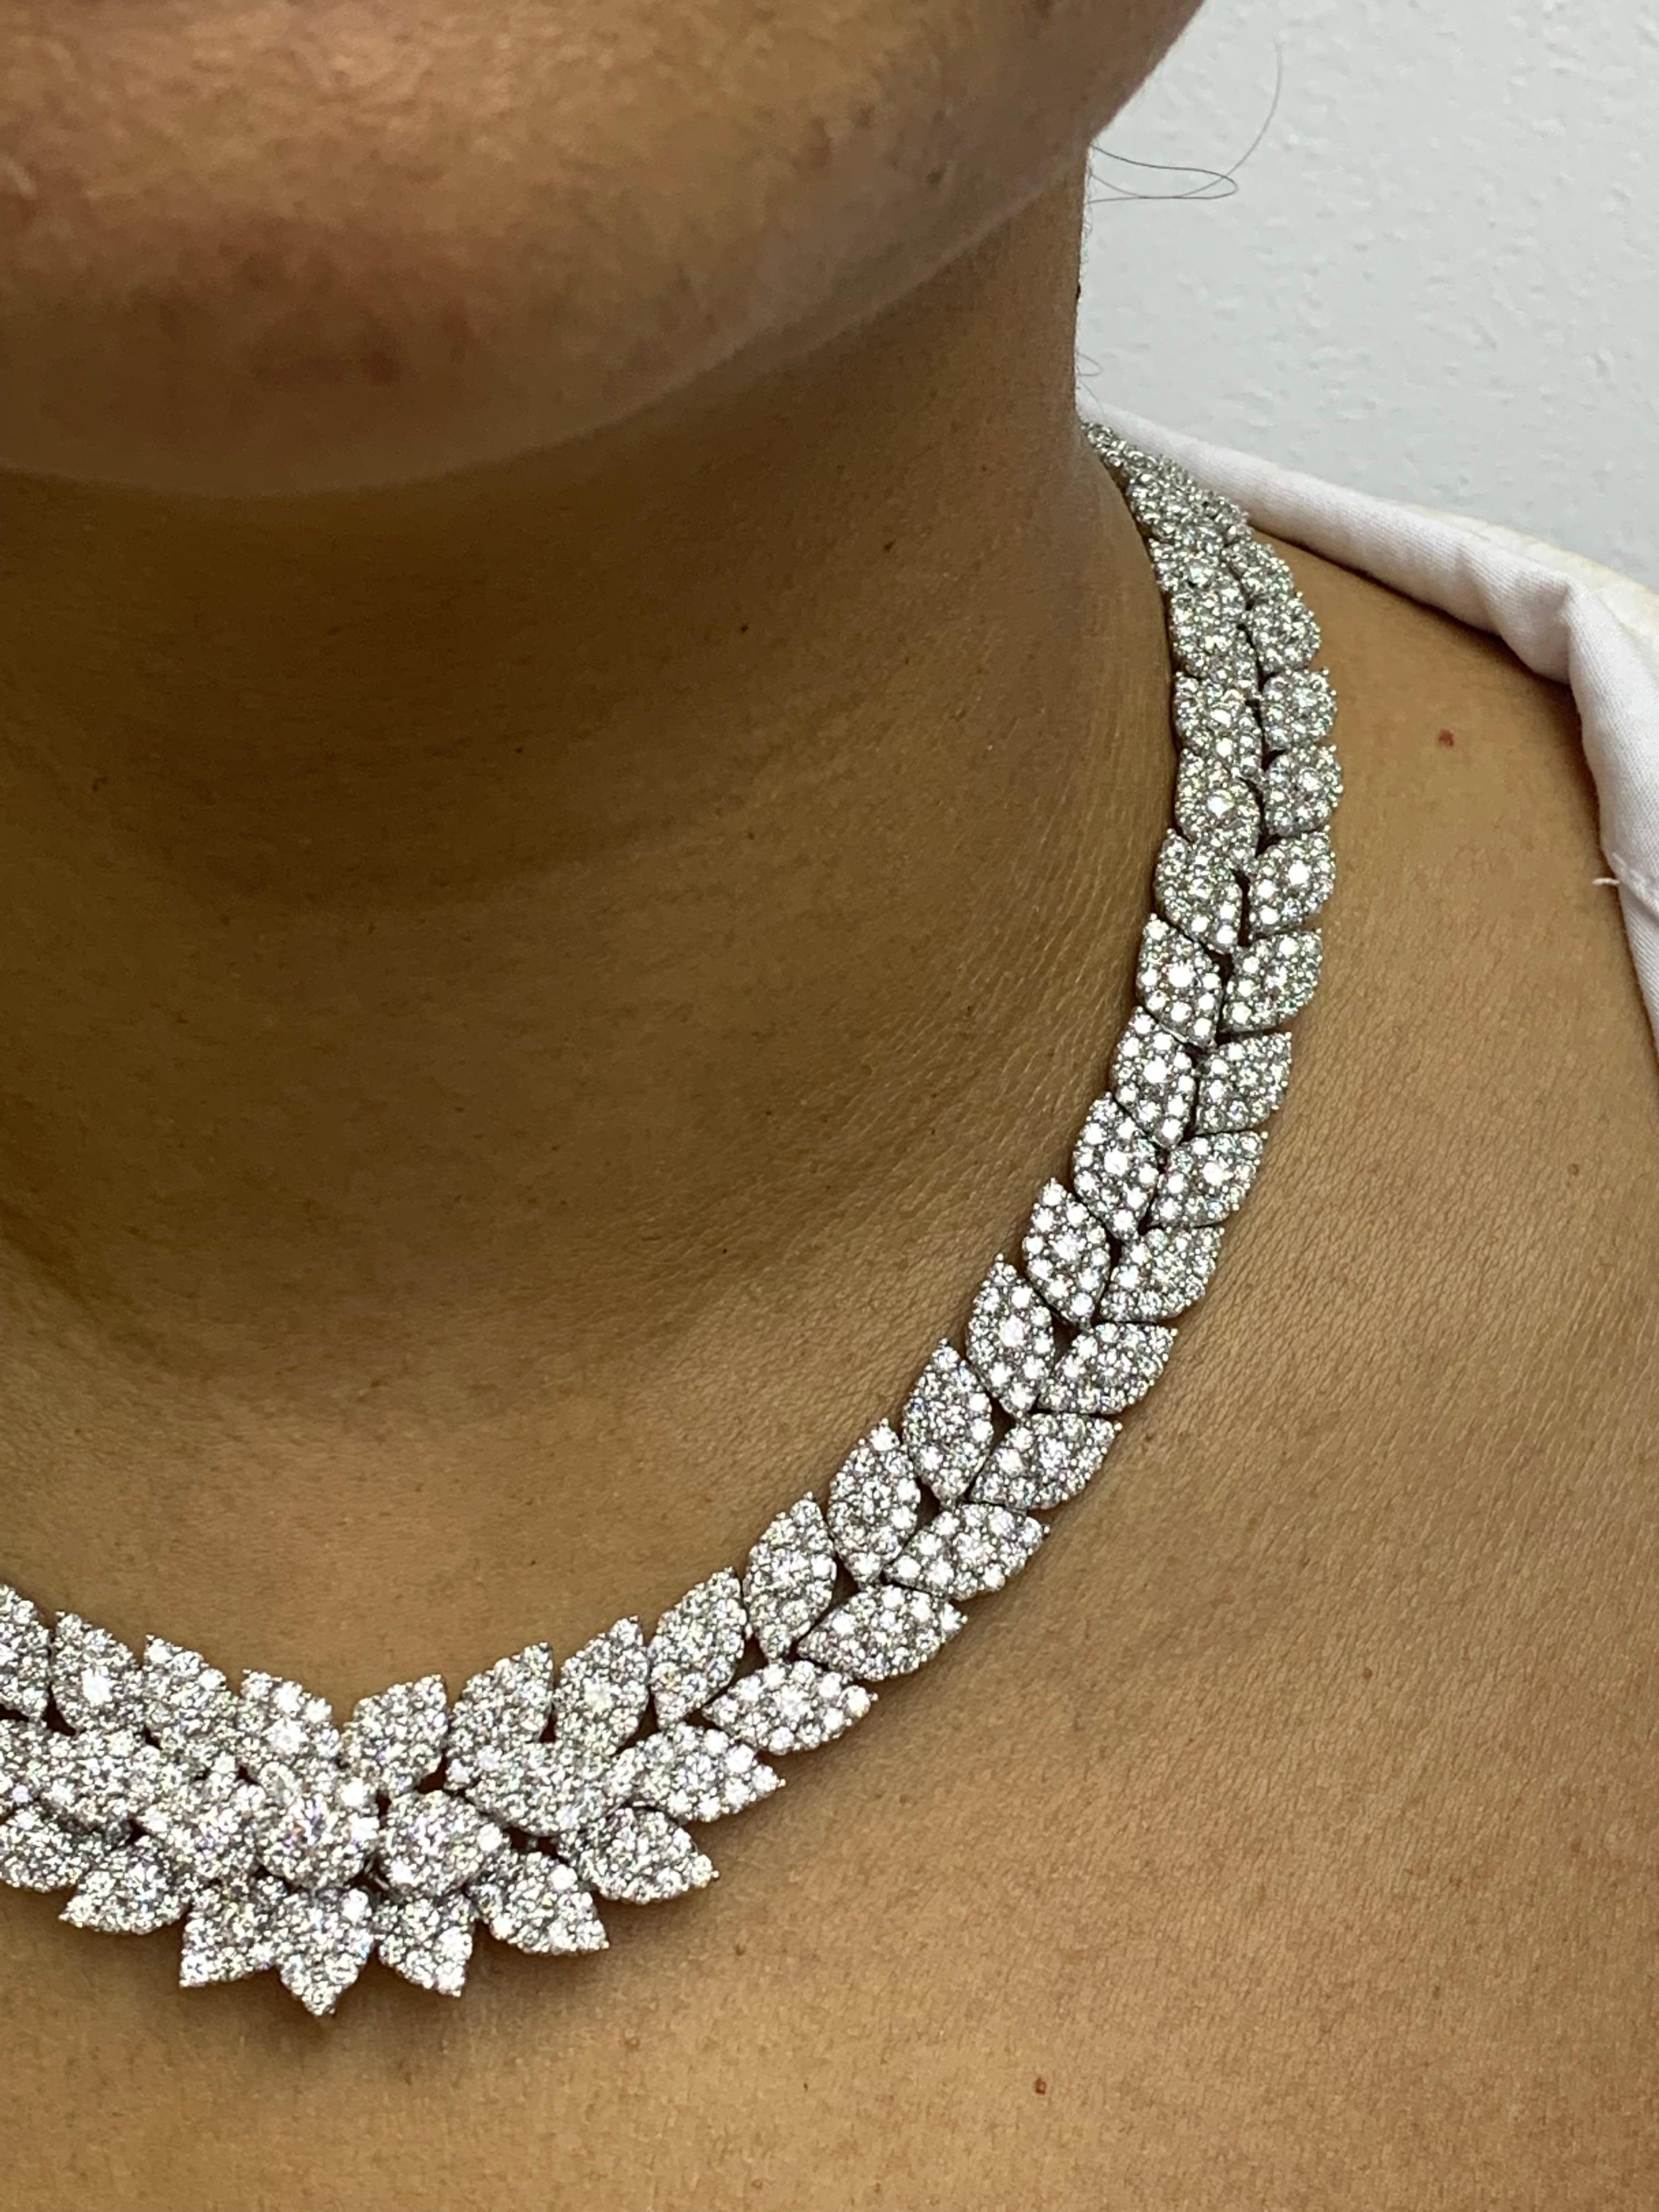 39.58 Carat Cluster Diamond Necklace in 18K White Gold For Sale 9